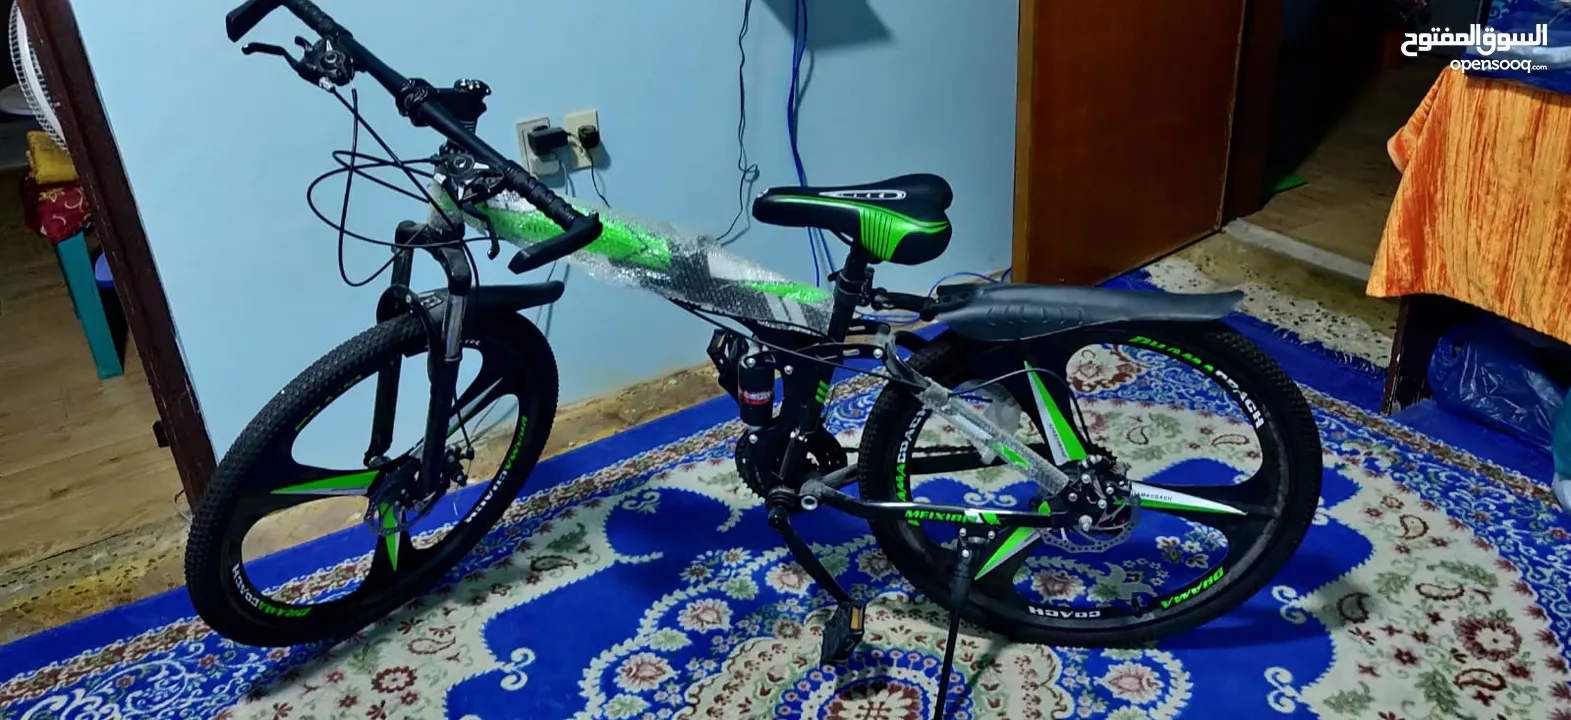 New auto gear bicycle